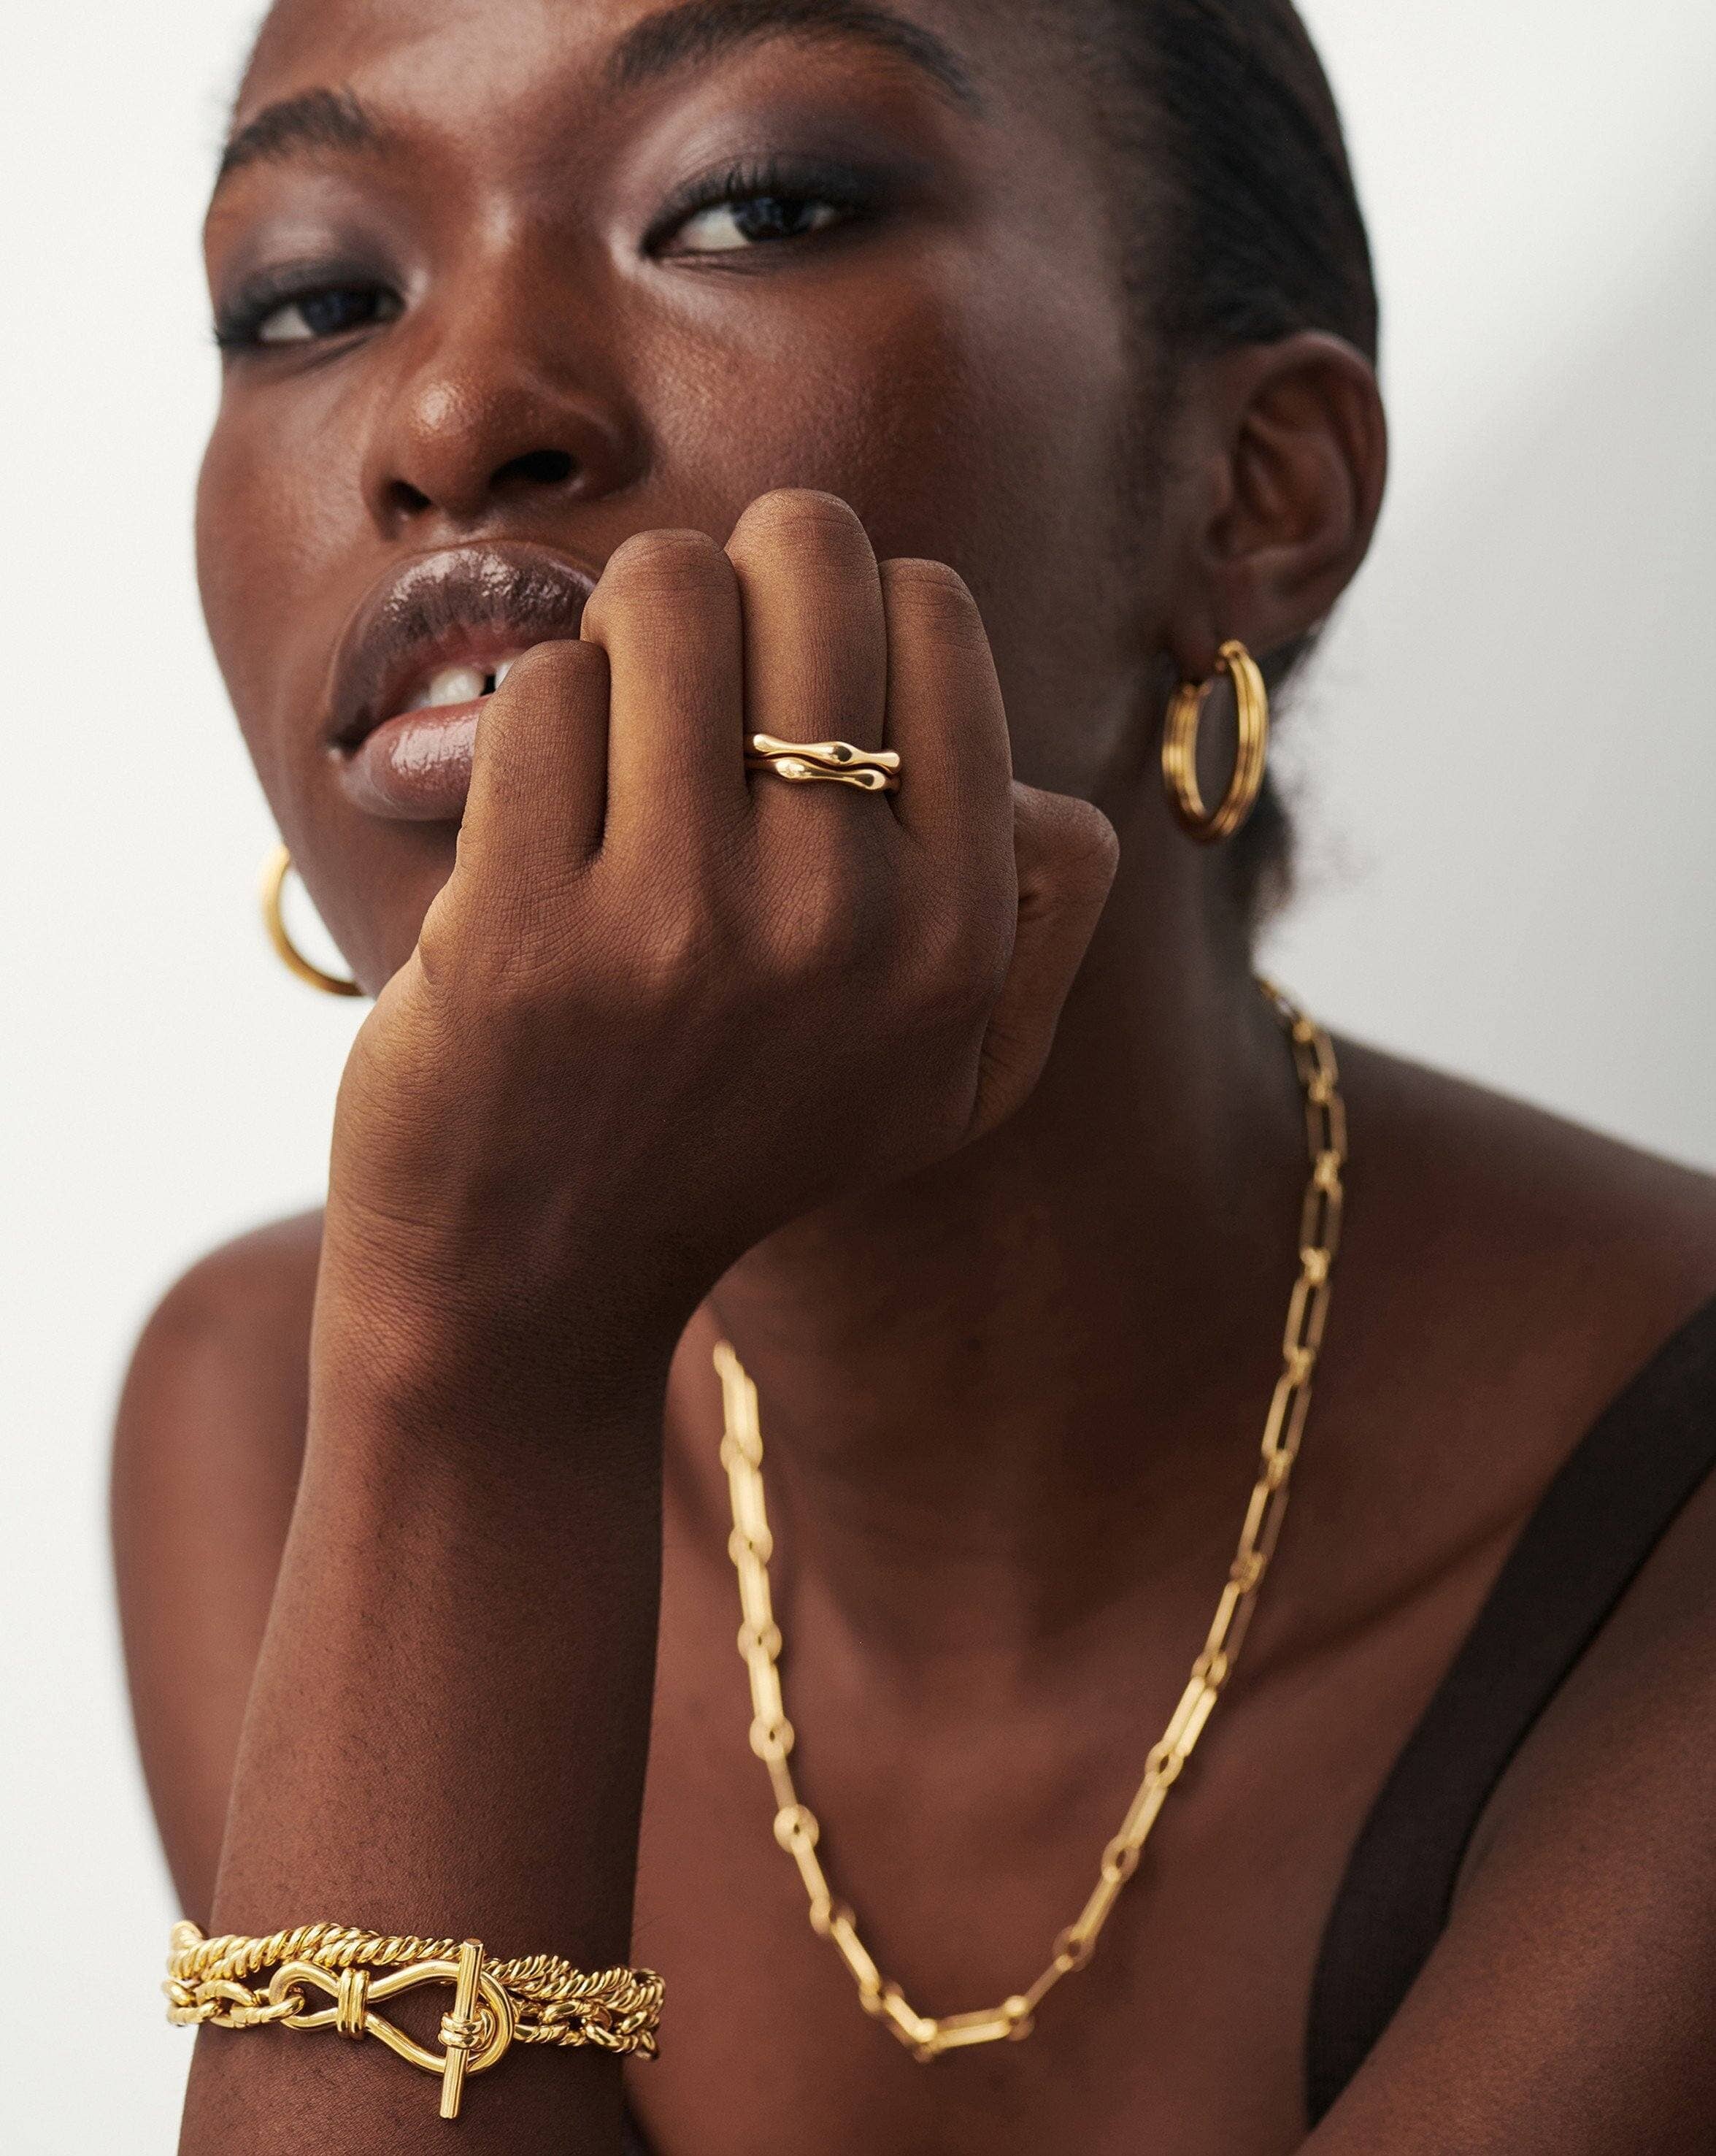 Molten Ring | 18ct Gold Plated Vermeil Rings Missoma 